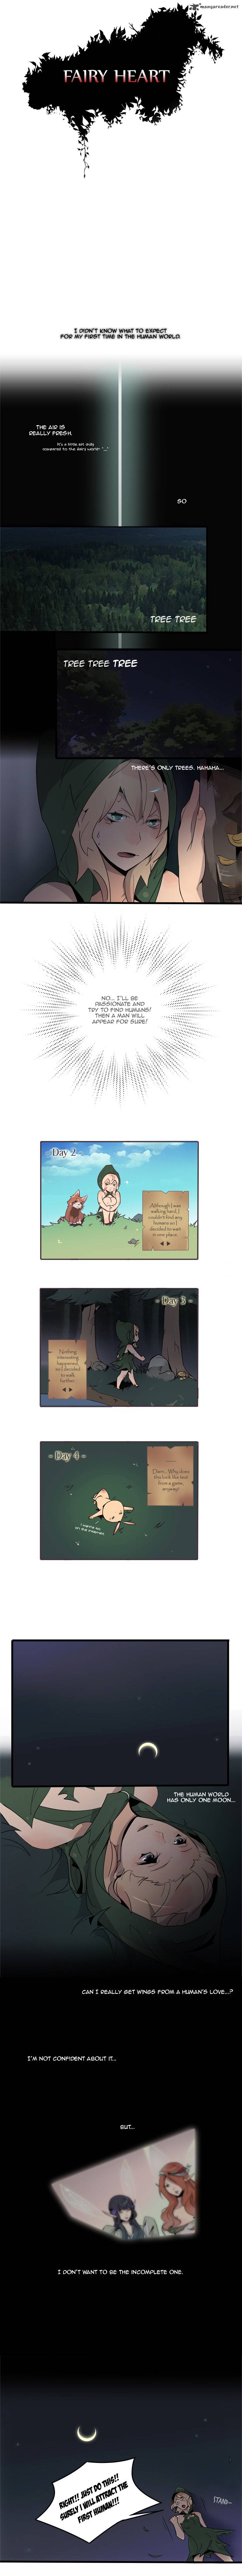 Fairy Heart Chapter 1 Page 5